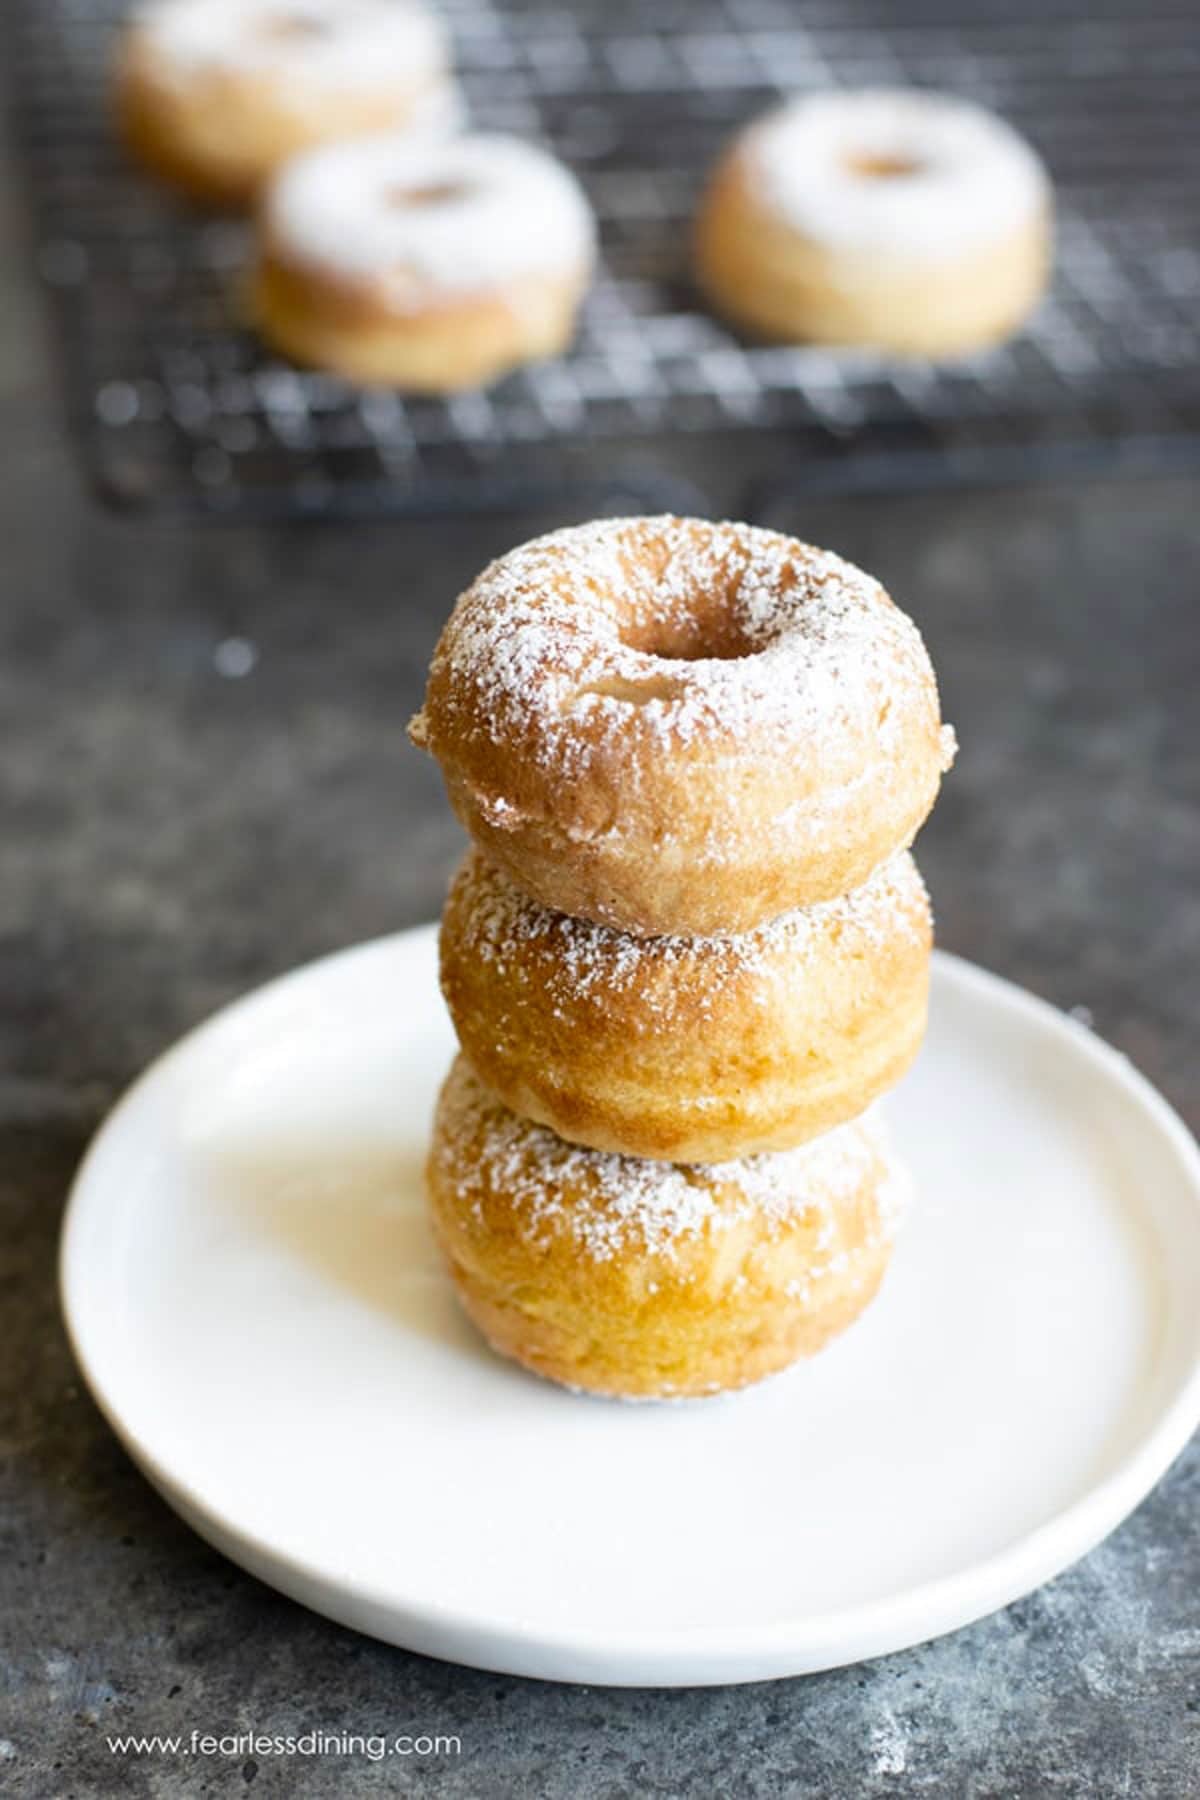 A stack of three egg-free donuts on a plate.